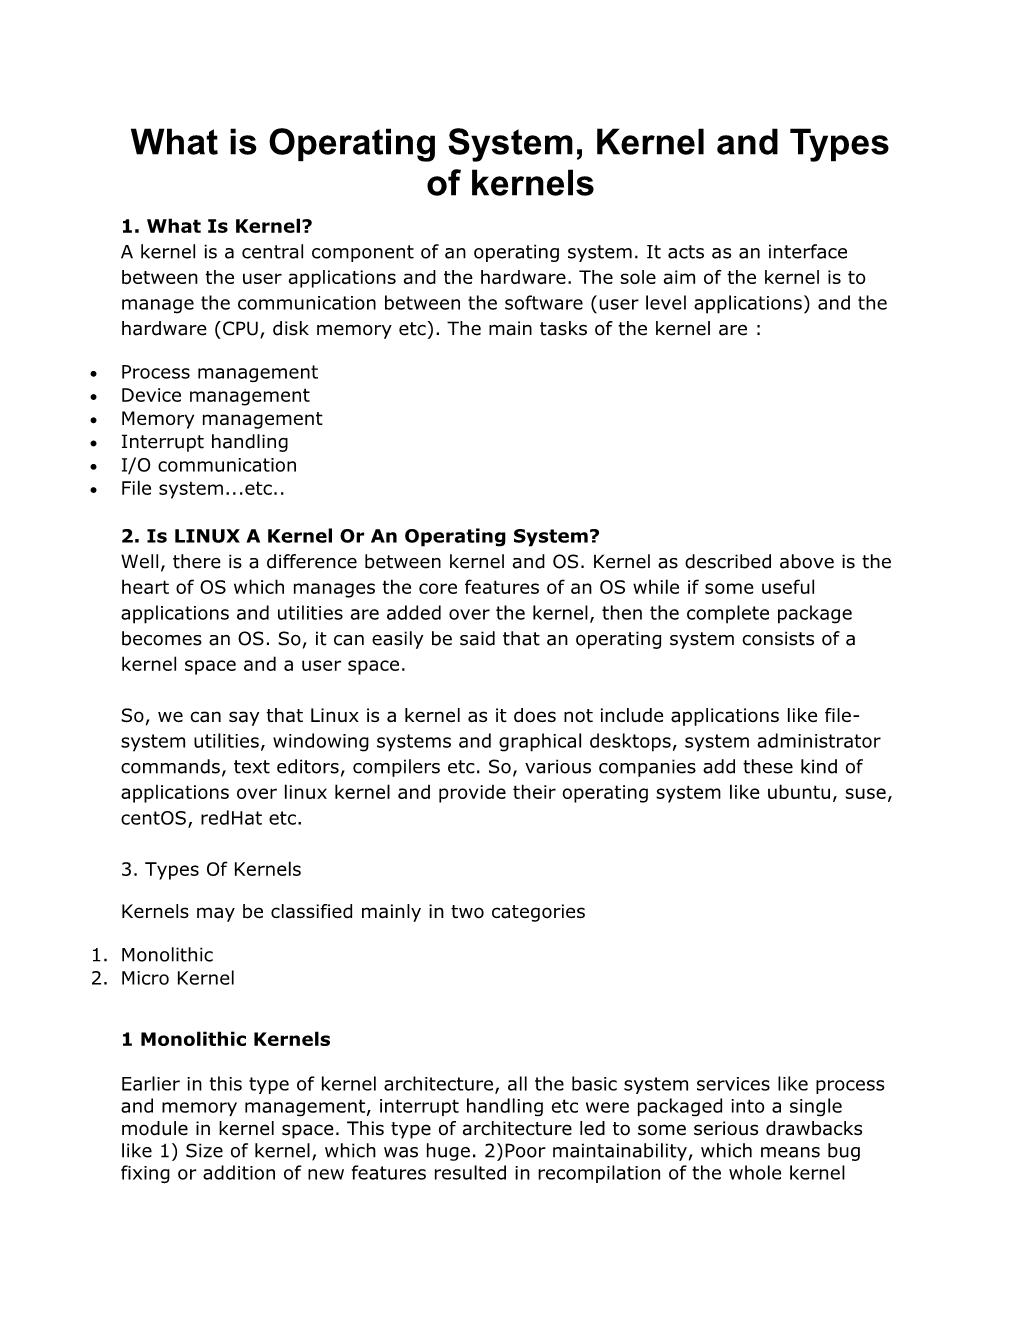 What Is Operating System, Kernel and Types of Kernels 1